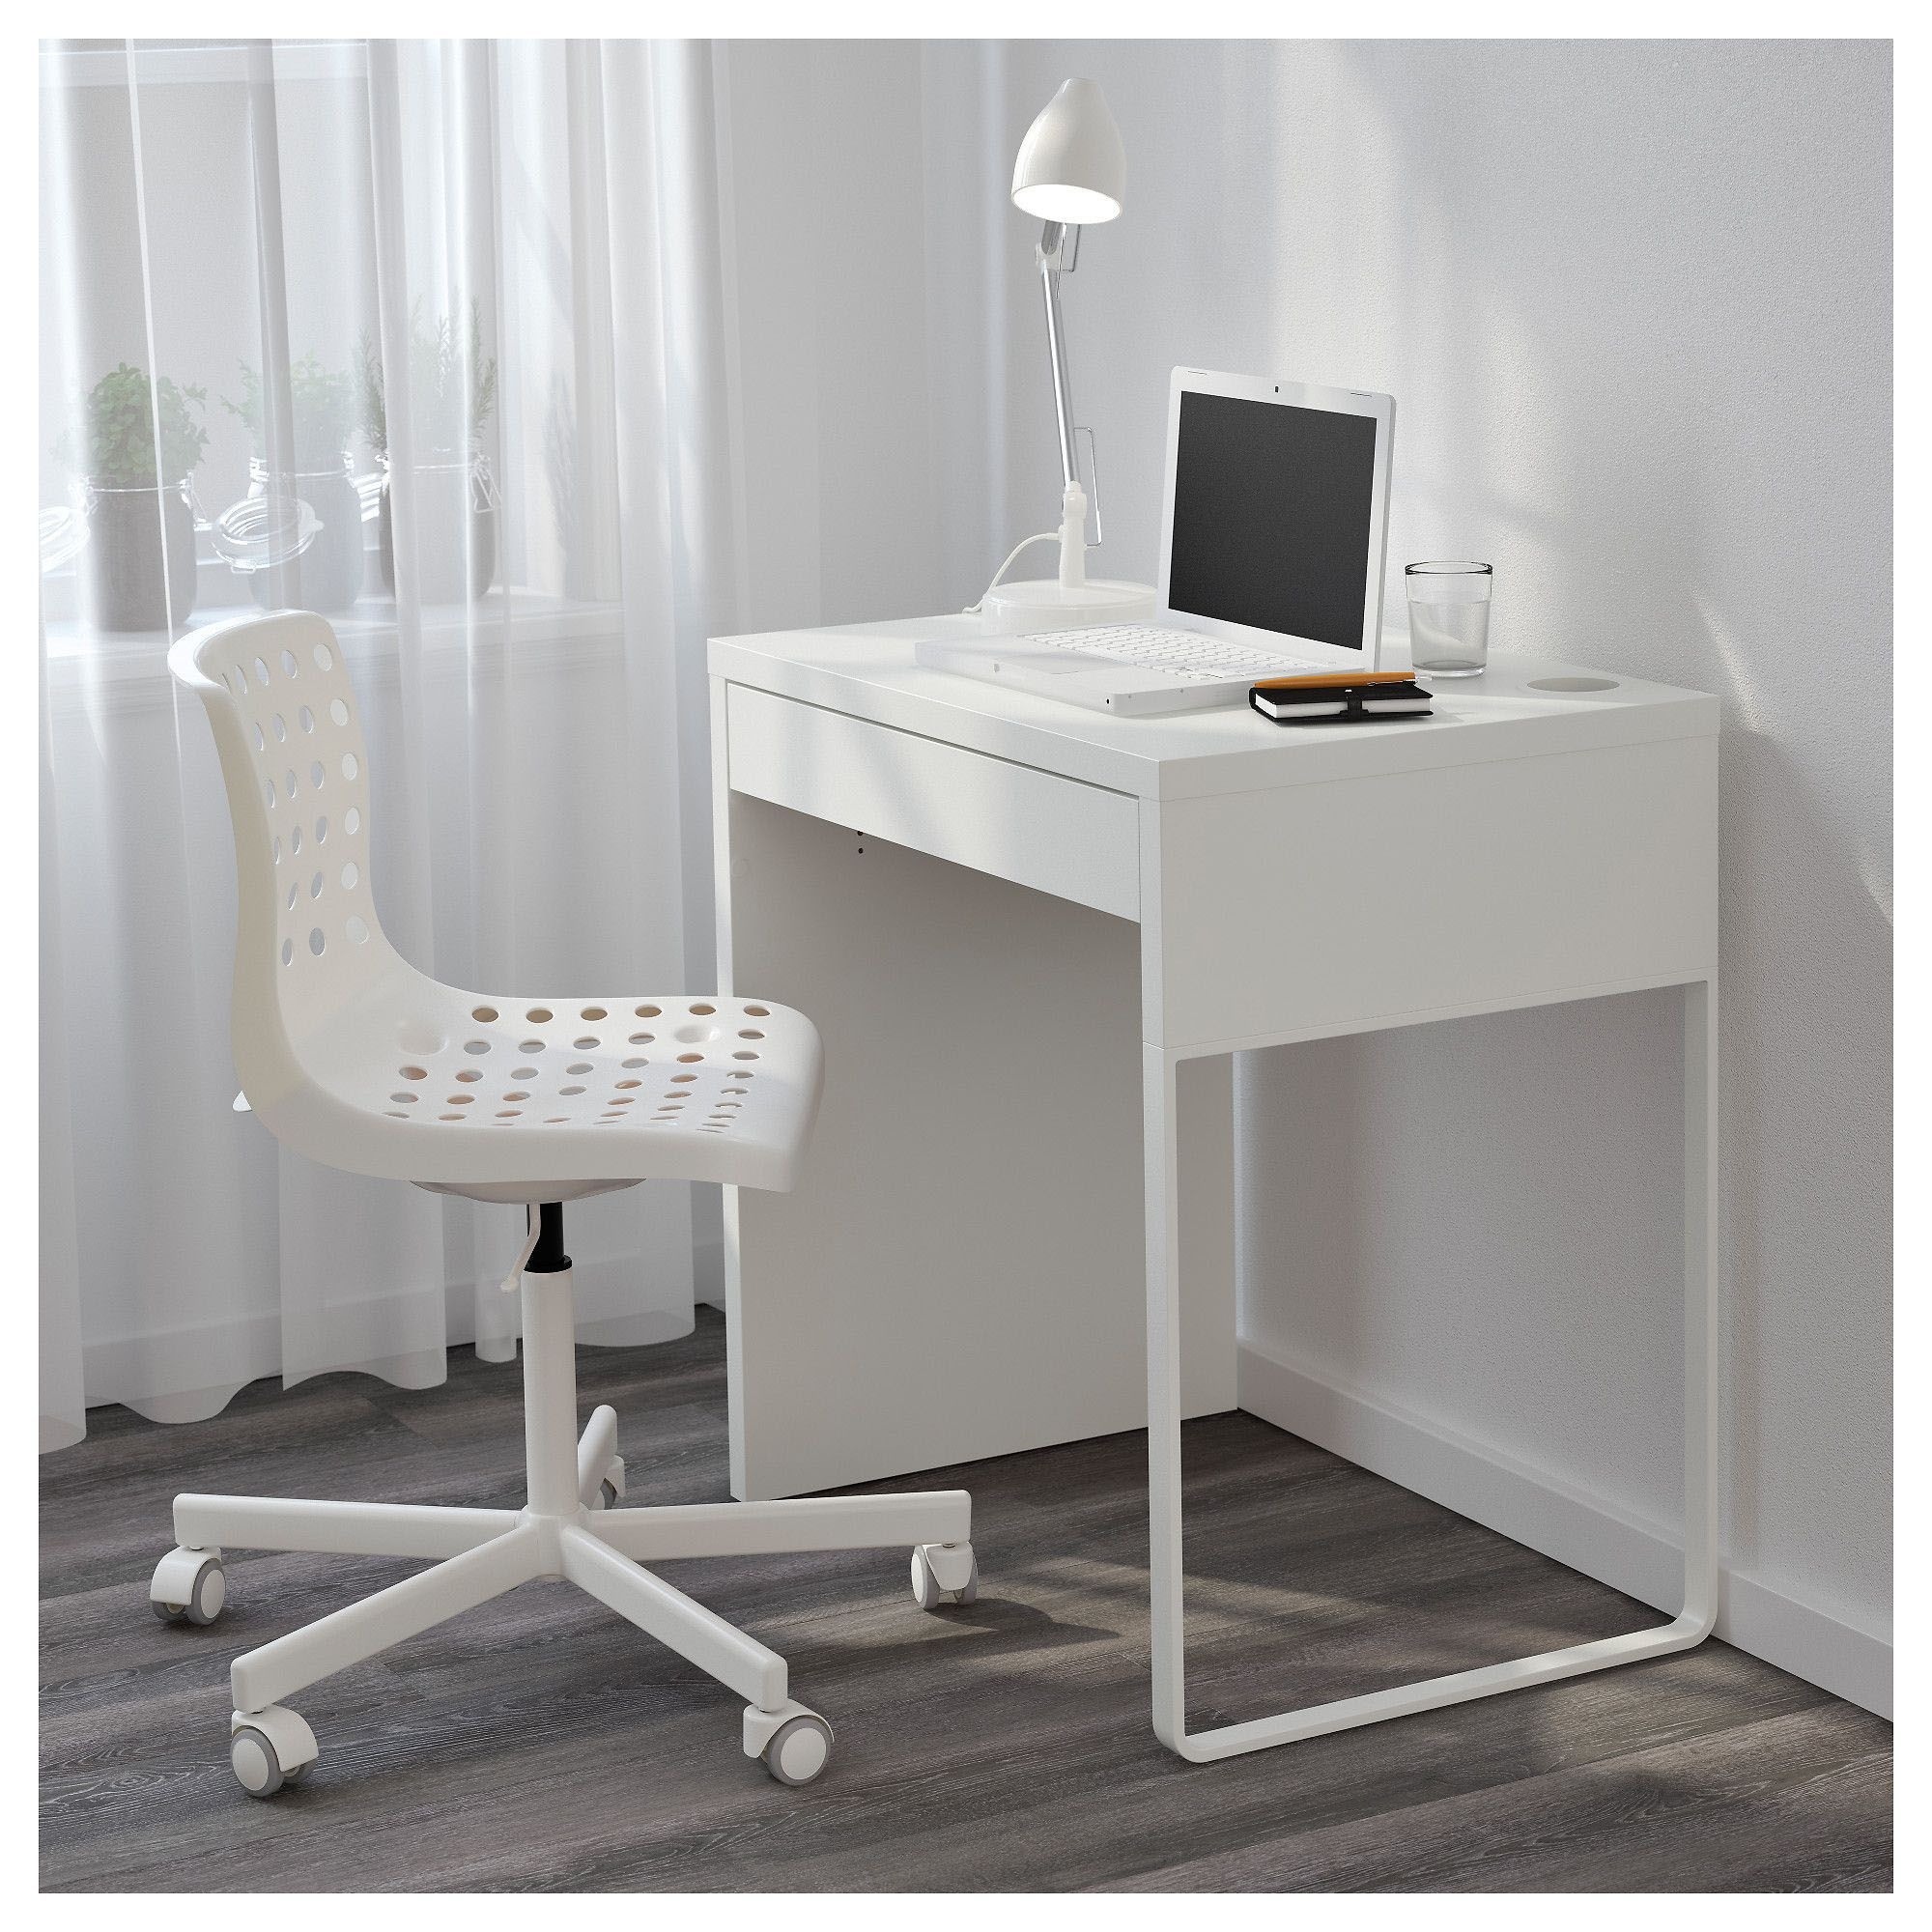 Desk Ideas Perfect For Small Spaces Desks For Small Spaces inside size 2000 X 2000